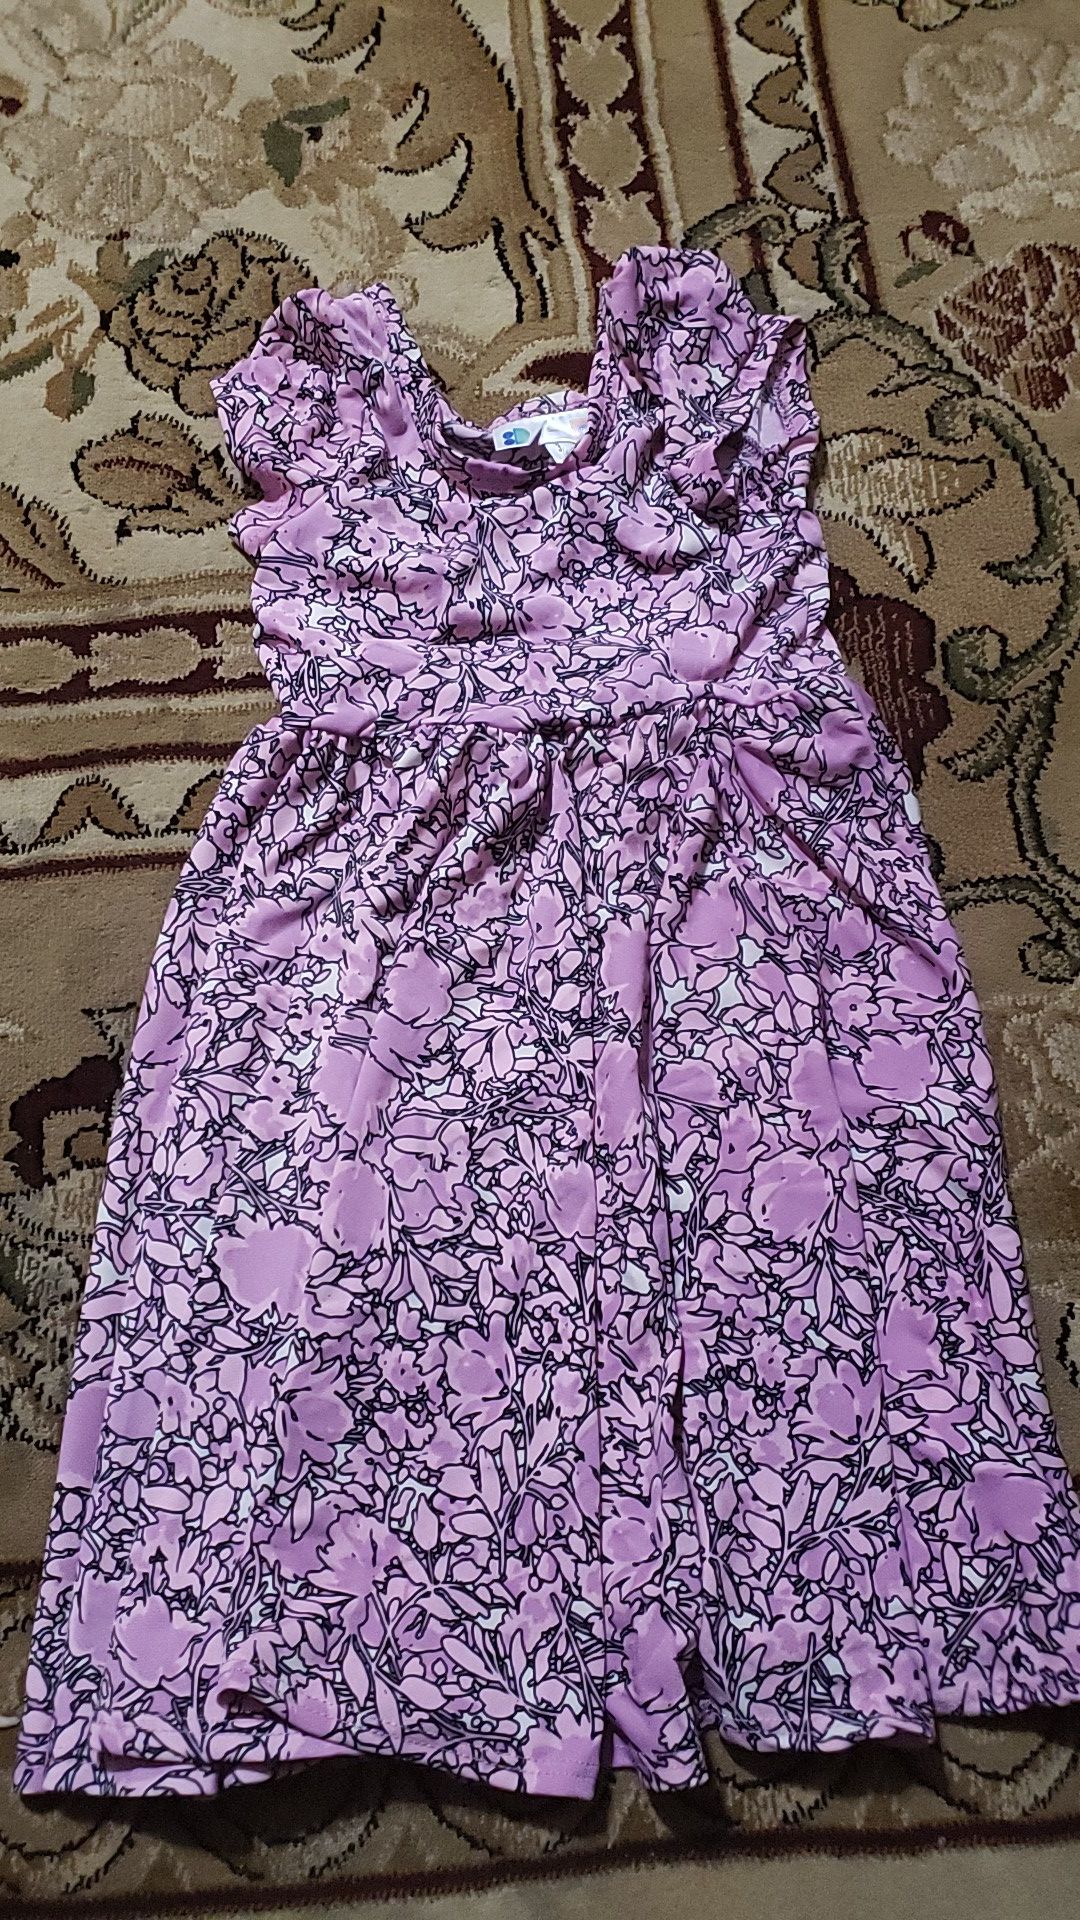 New dreses size 3.